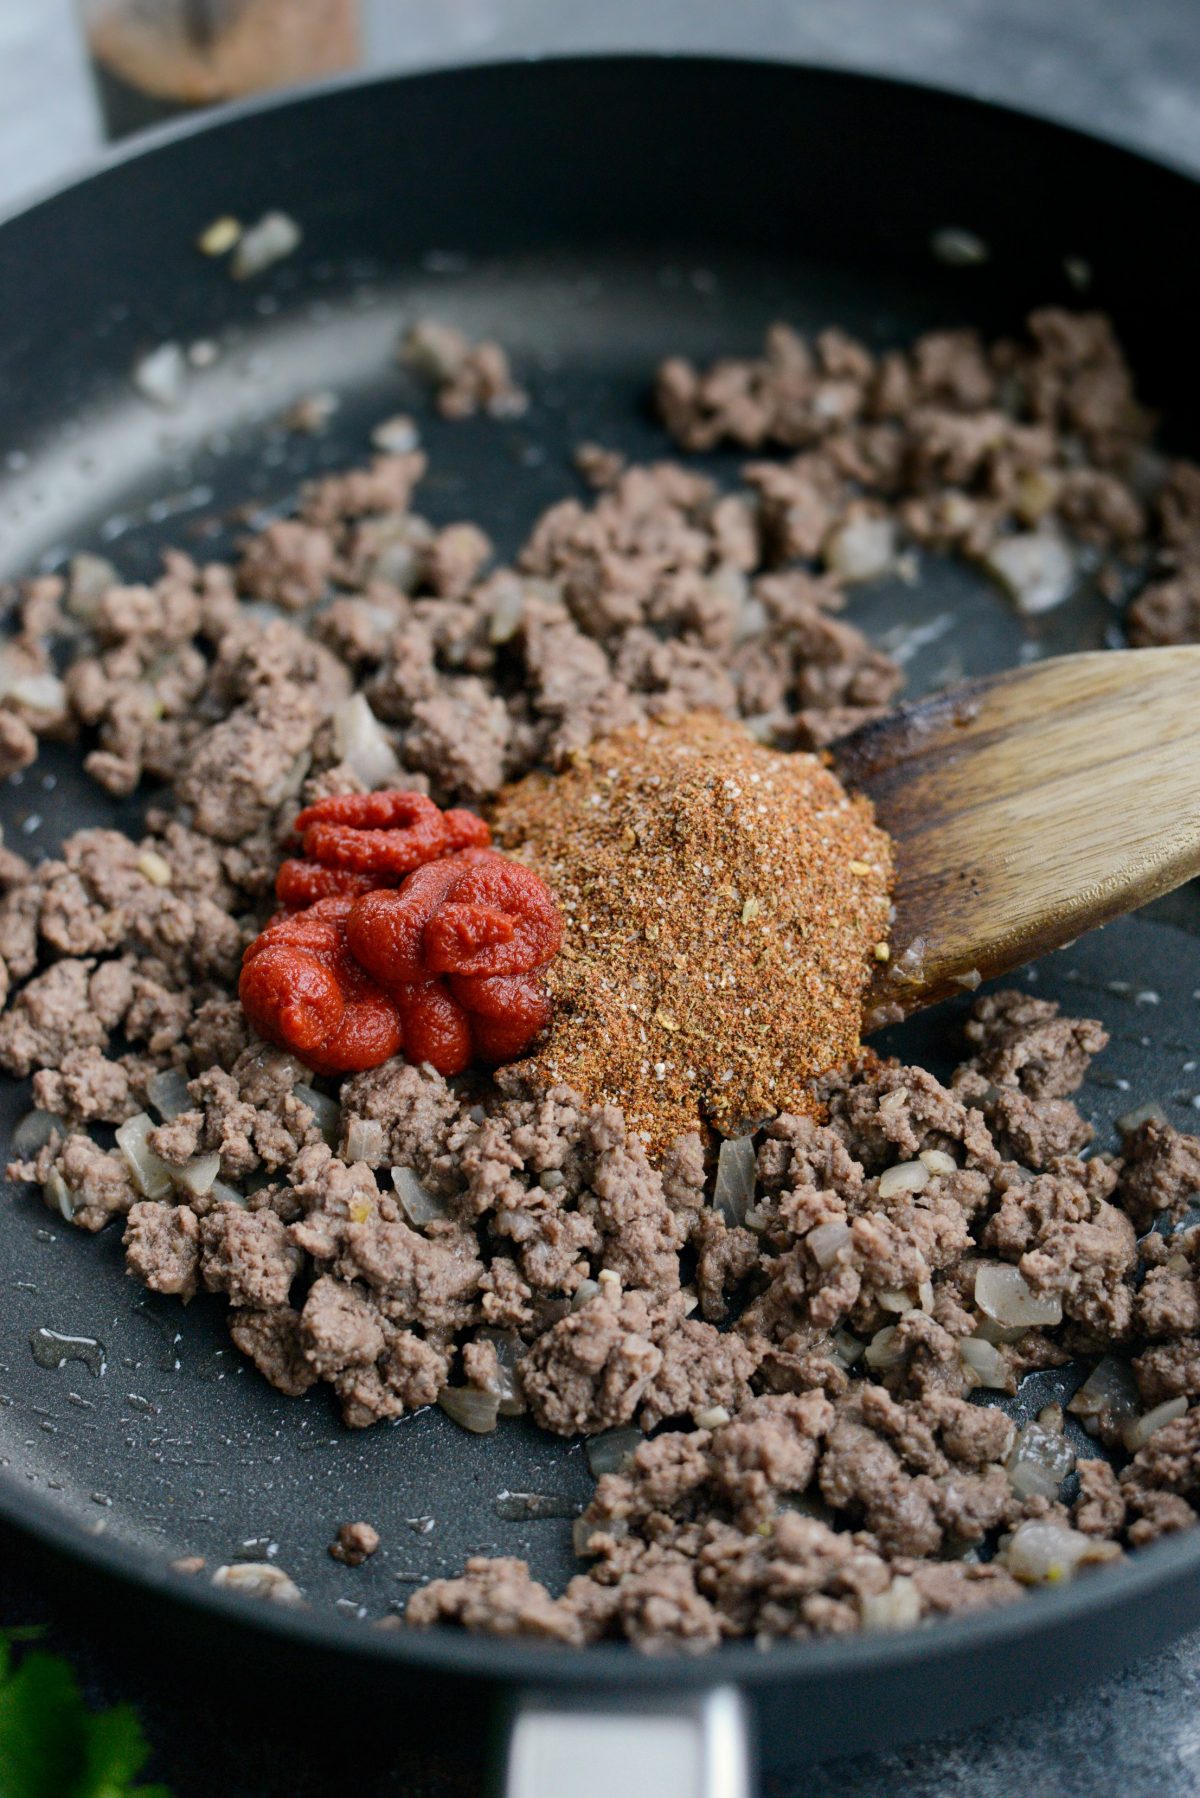 add tomato paste and taco seasoning to beef mixture.